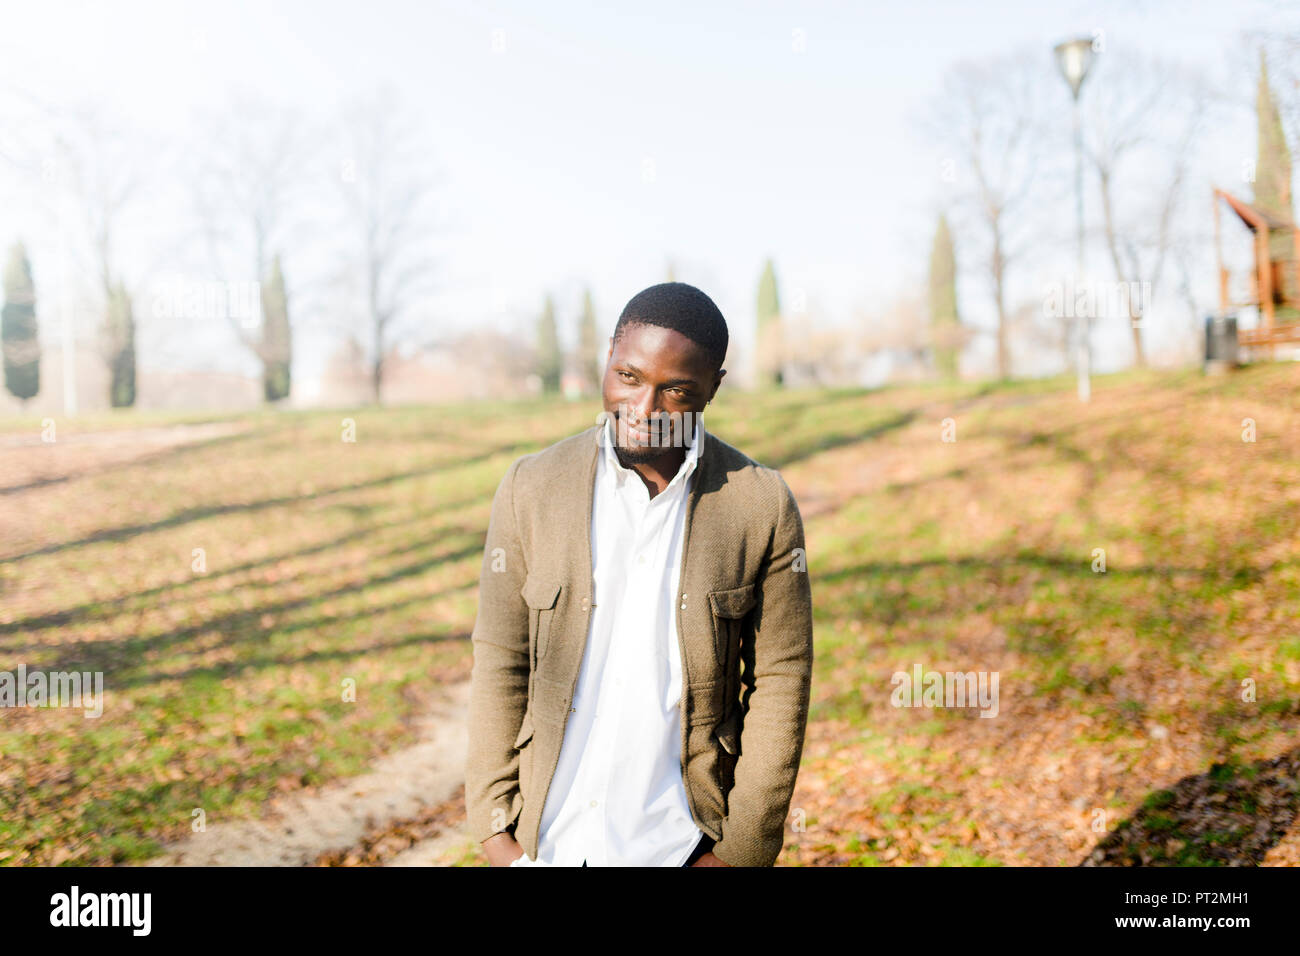 Portrait ogf young man in park, wearing jacket, looking shy Stock Photo